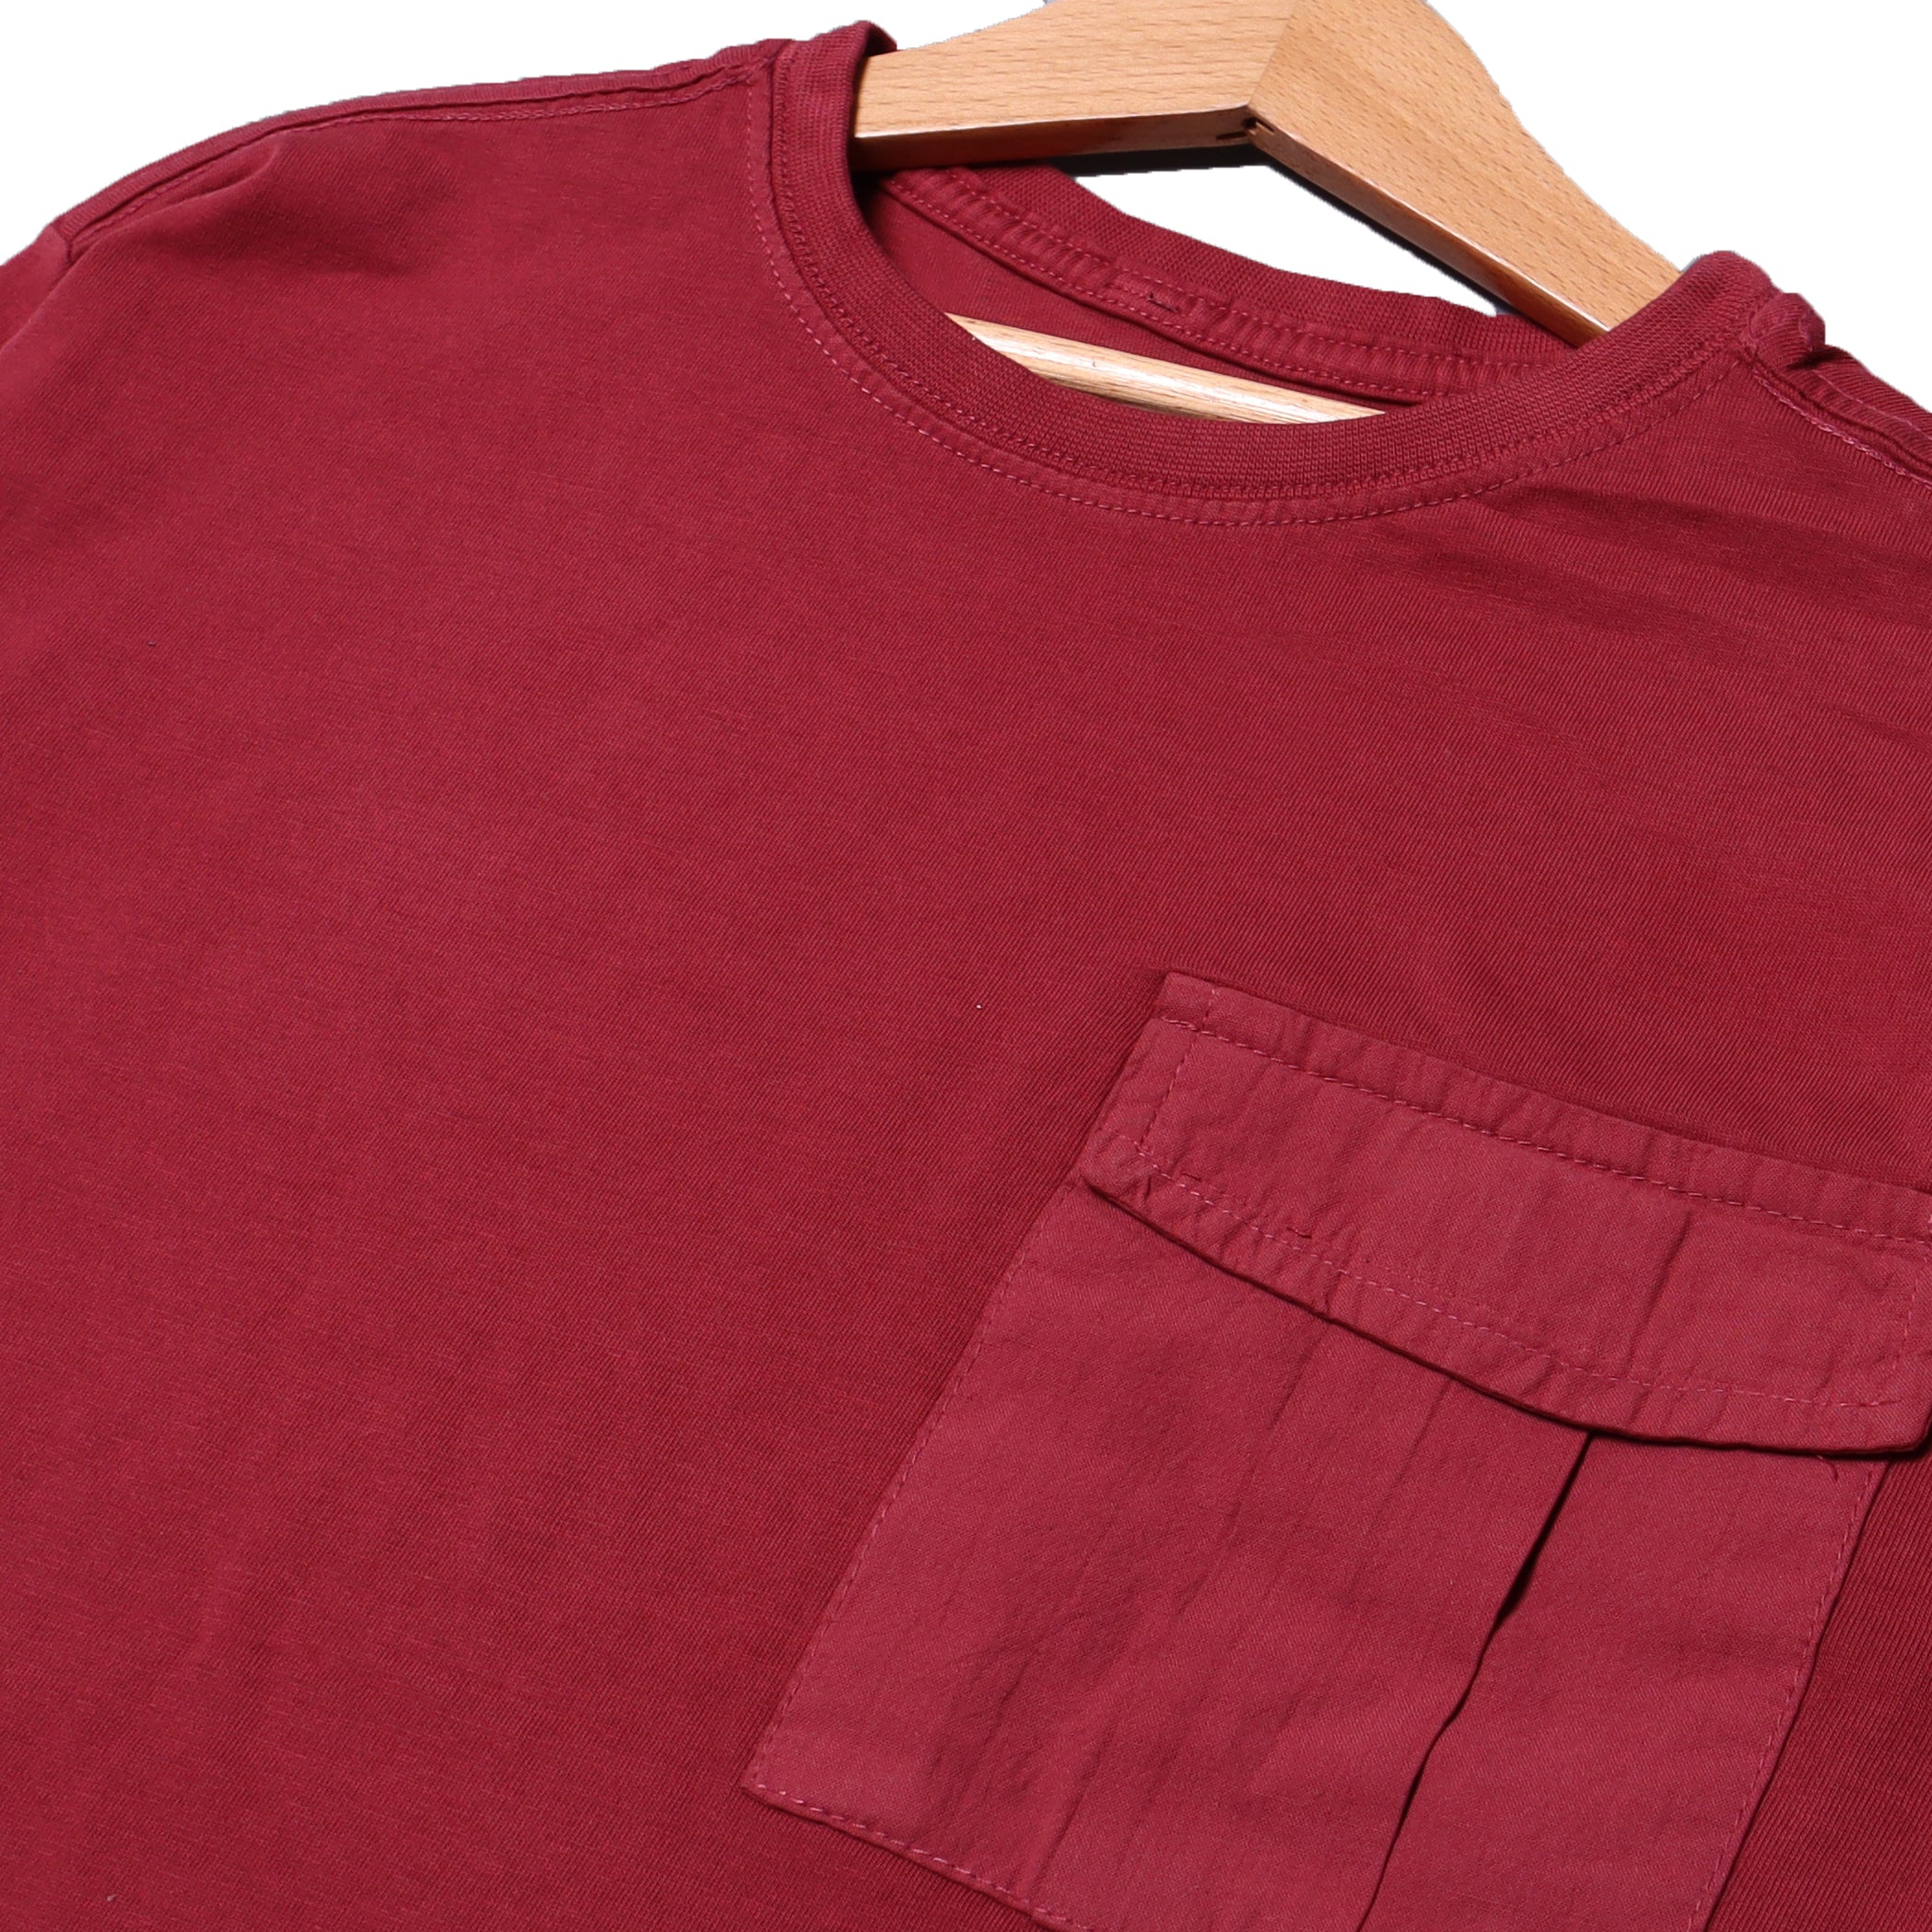 MINOR DEFECTION MAROON PLAIN WITH POCKET FULL SLEEVES T-SHIRT